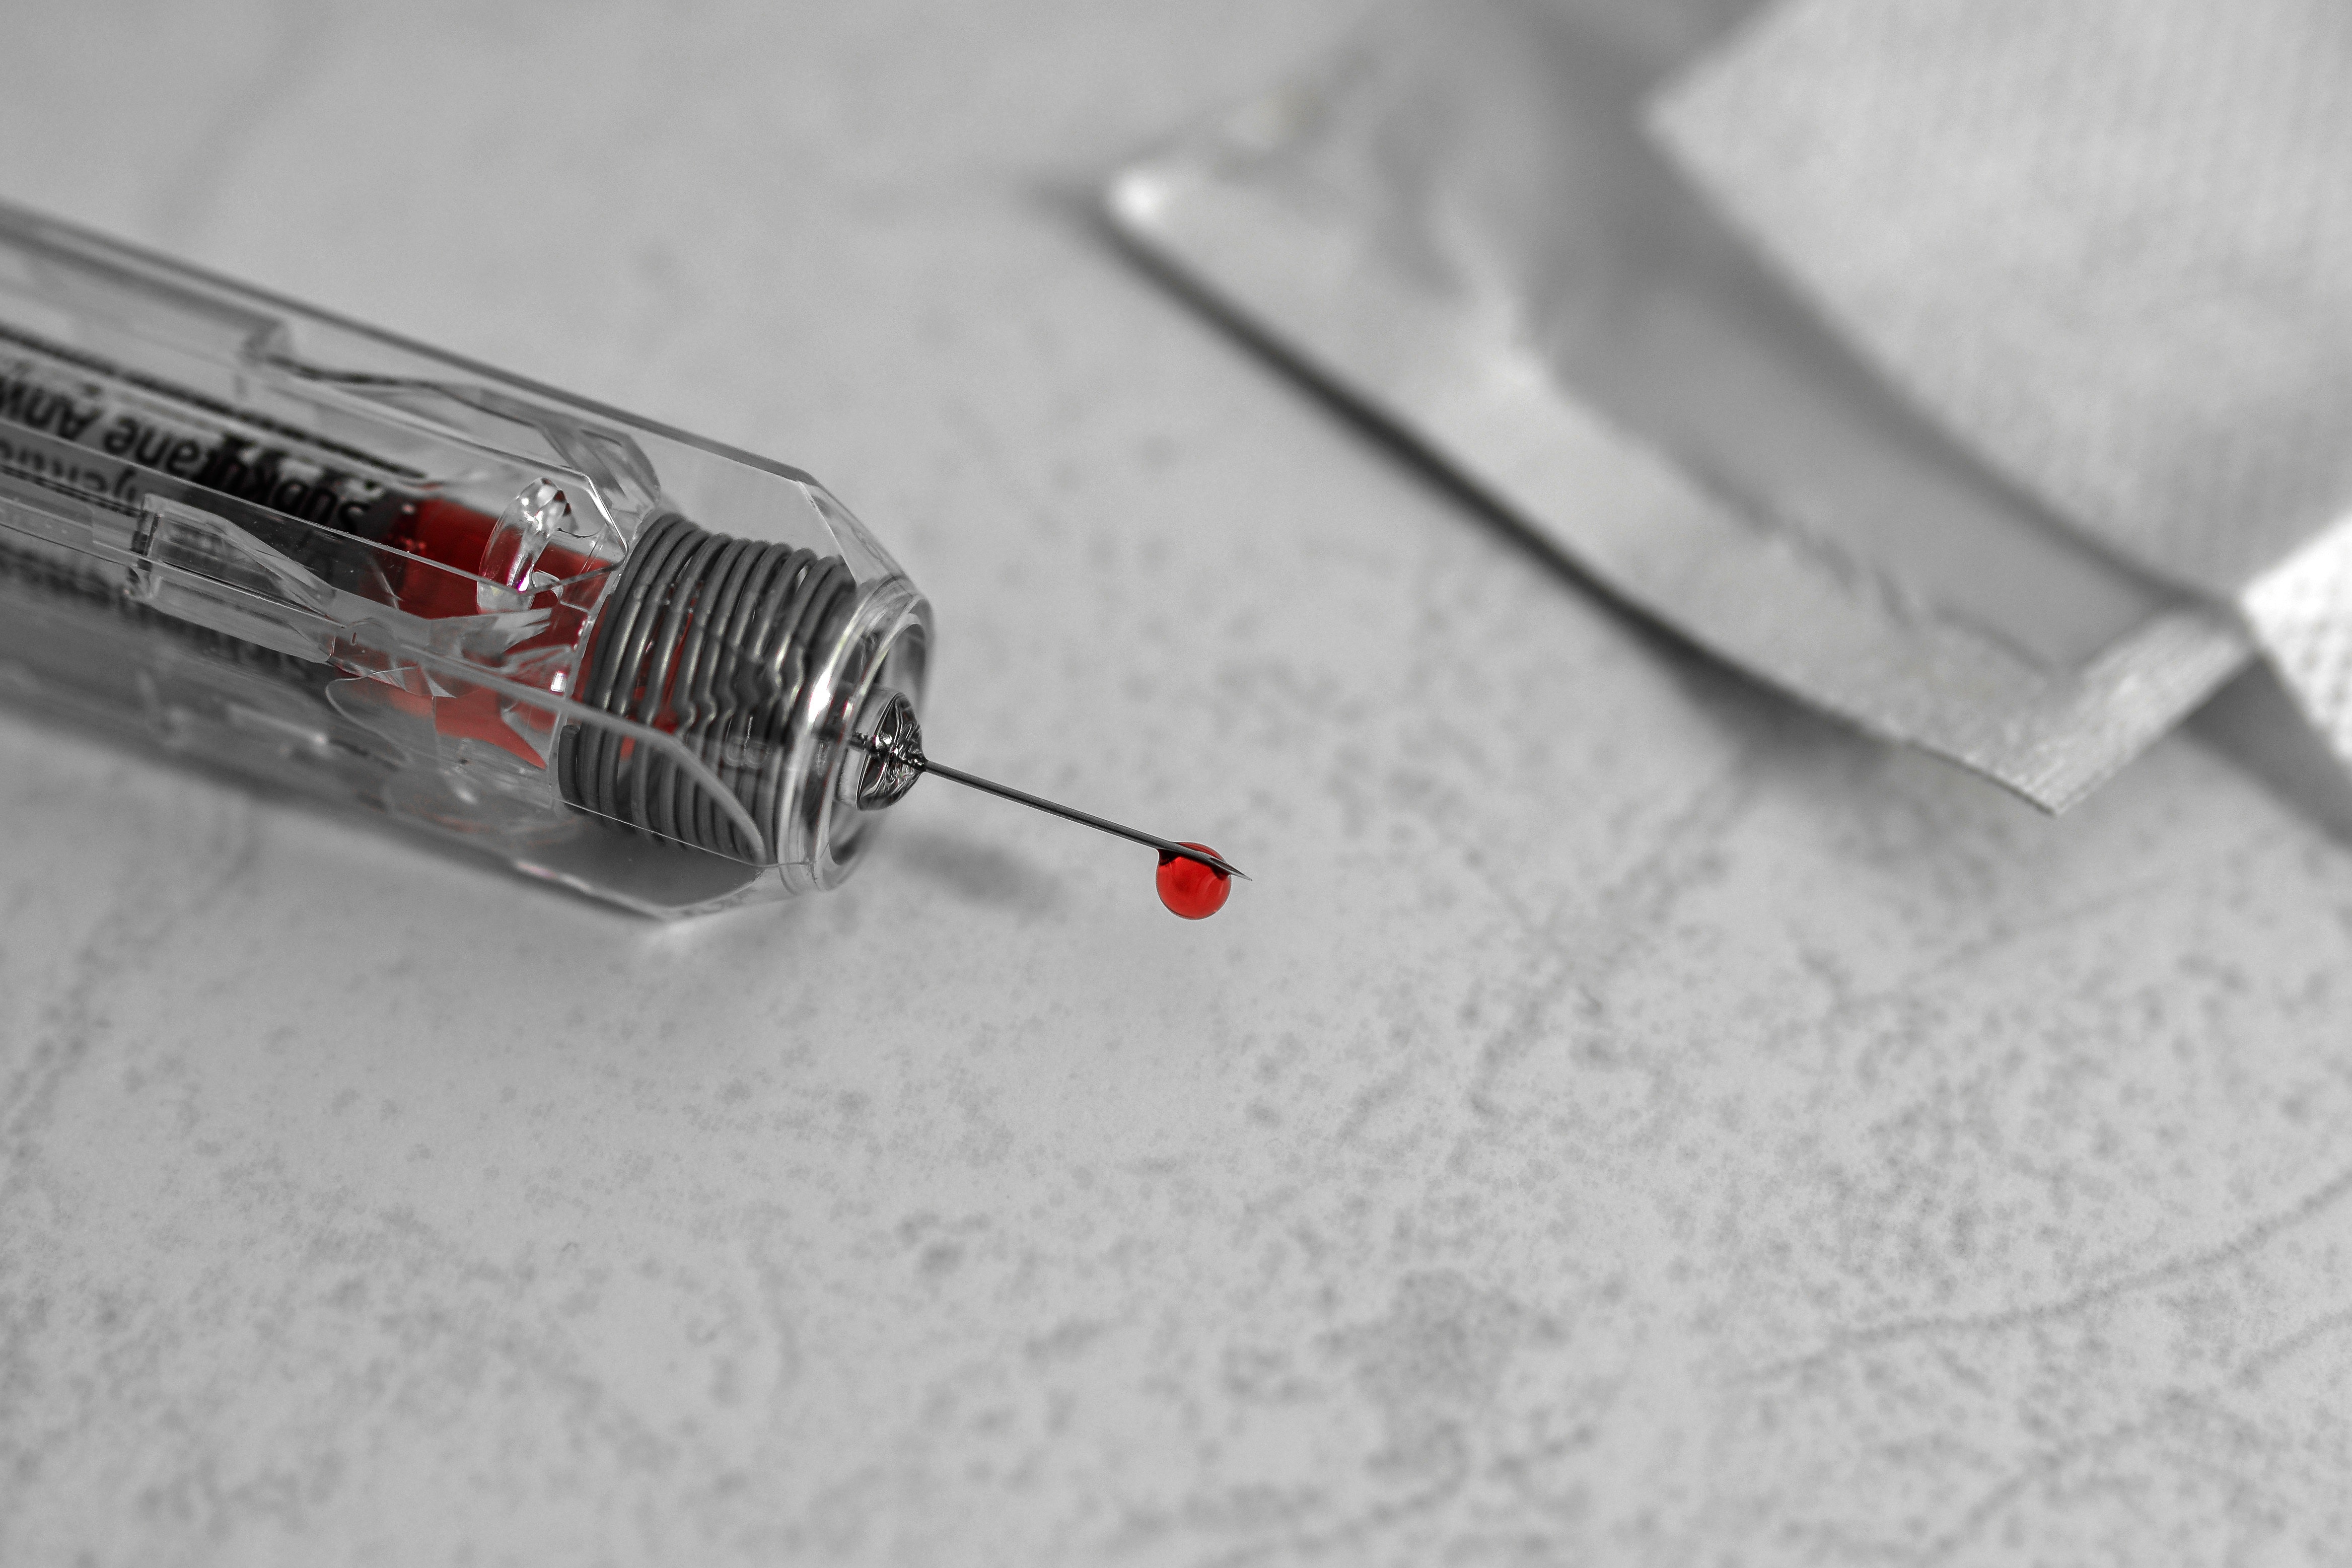 Close up of a blood drop on the end of a needle, which is attached to a syringe. The syringe is sitting on a hard grey surface.